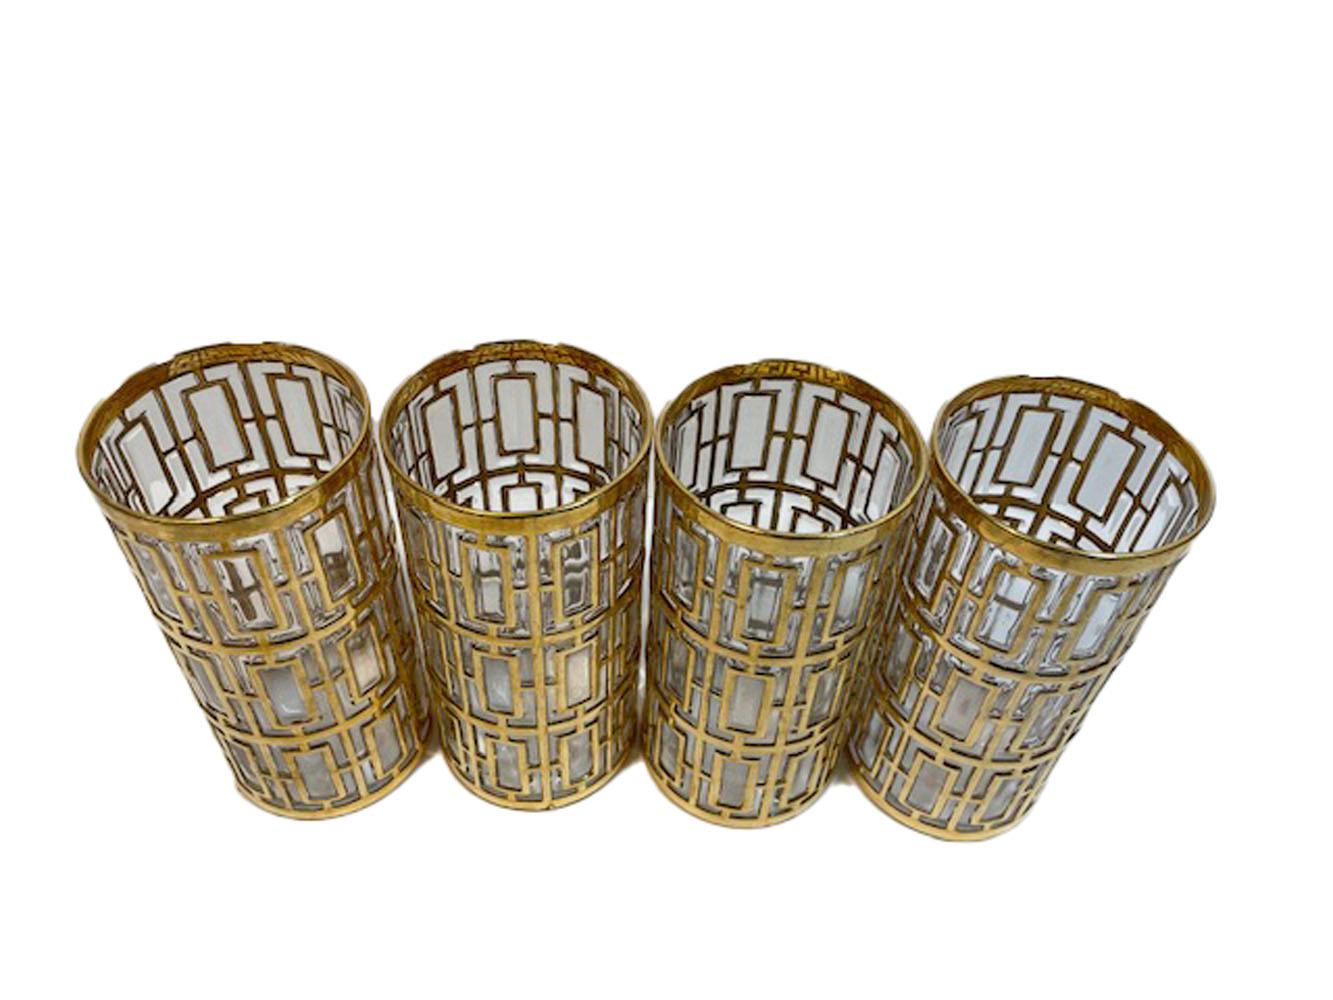 Mid-Century Modern Vintage Set of 8 Imperial Glass Co. Highball Glasses in the Shoji Pattern